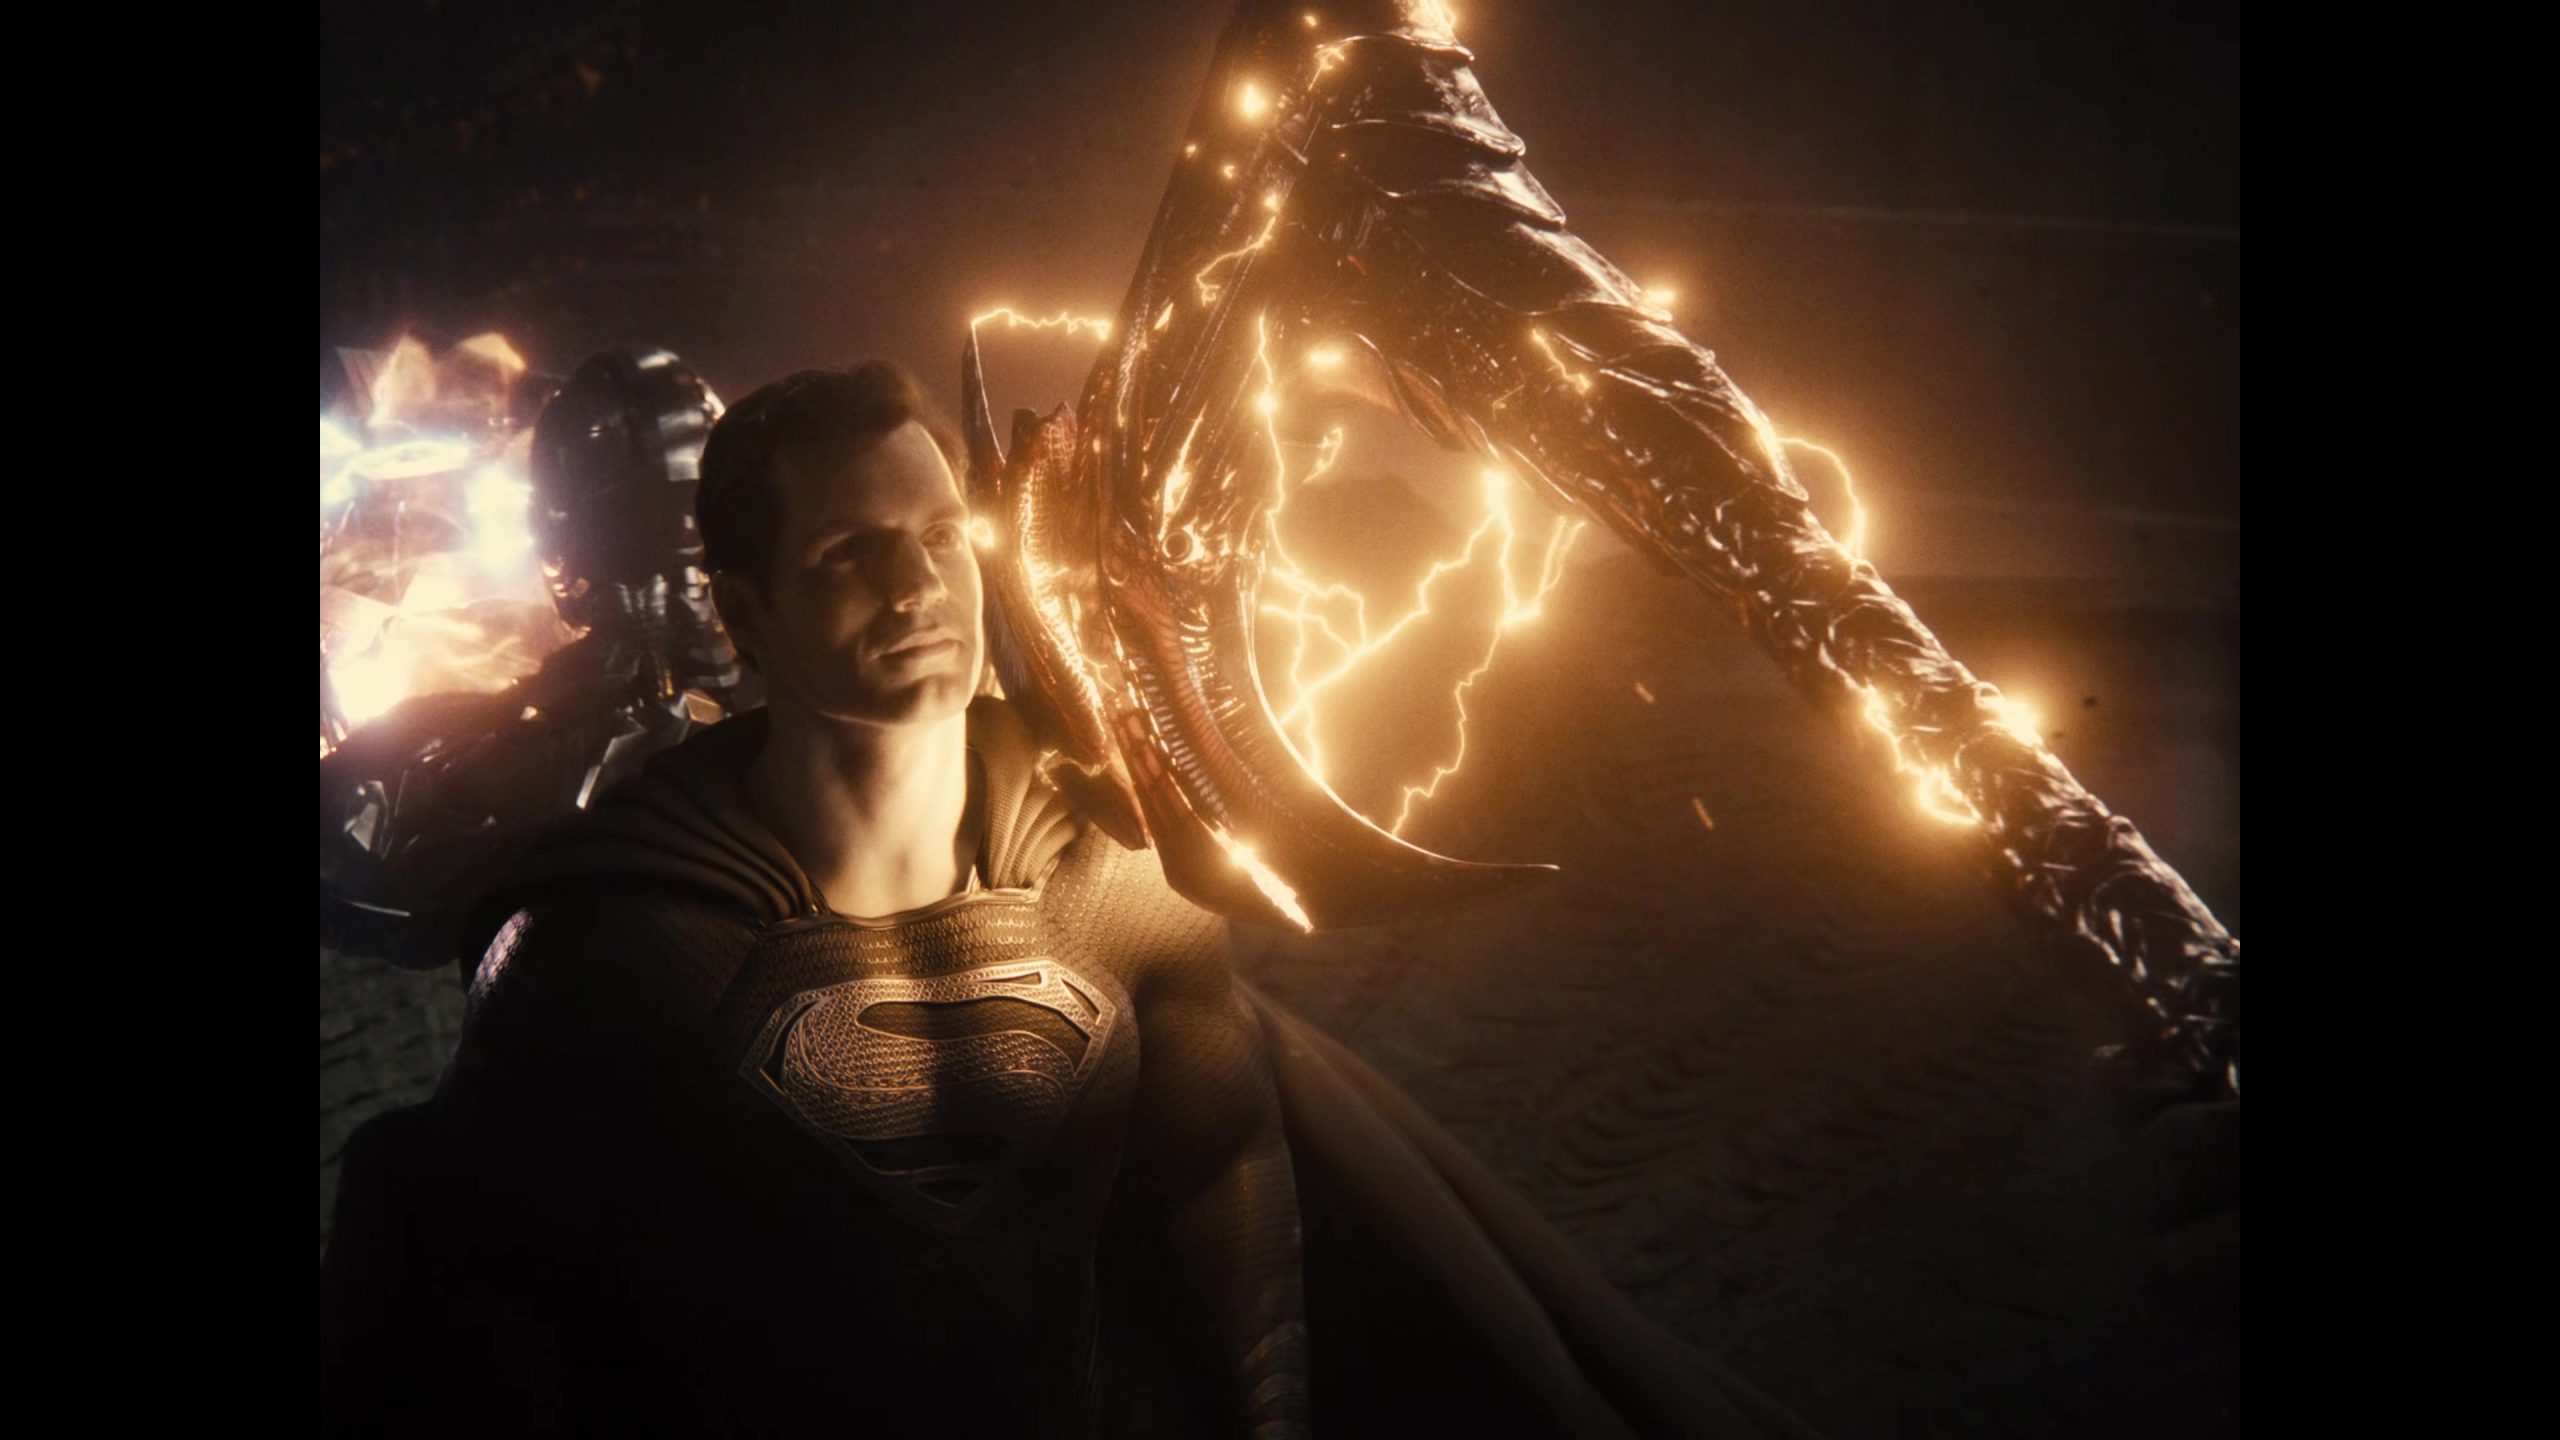 Superman (Henry Cavill) returns in Zack Snyder's Justice League (2021), Warner Bros. Pictures